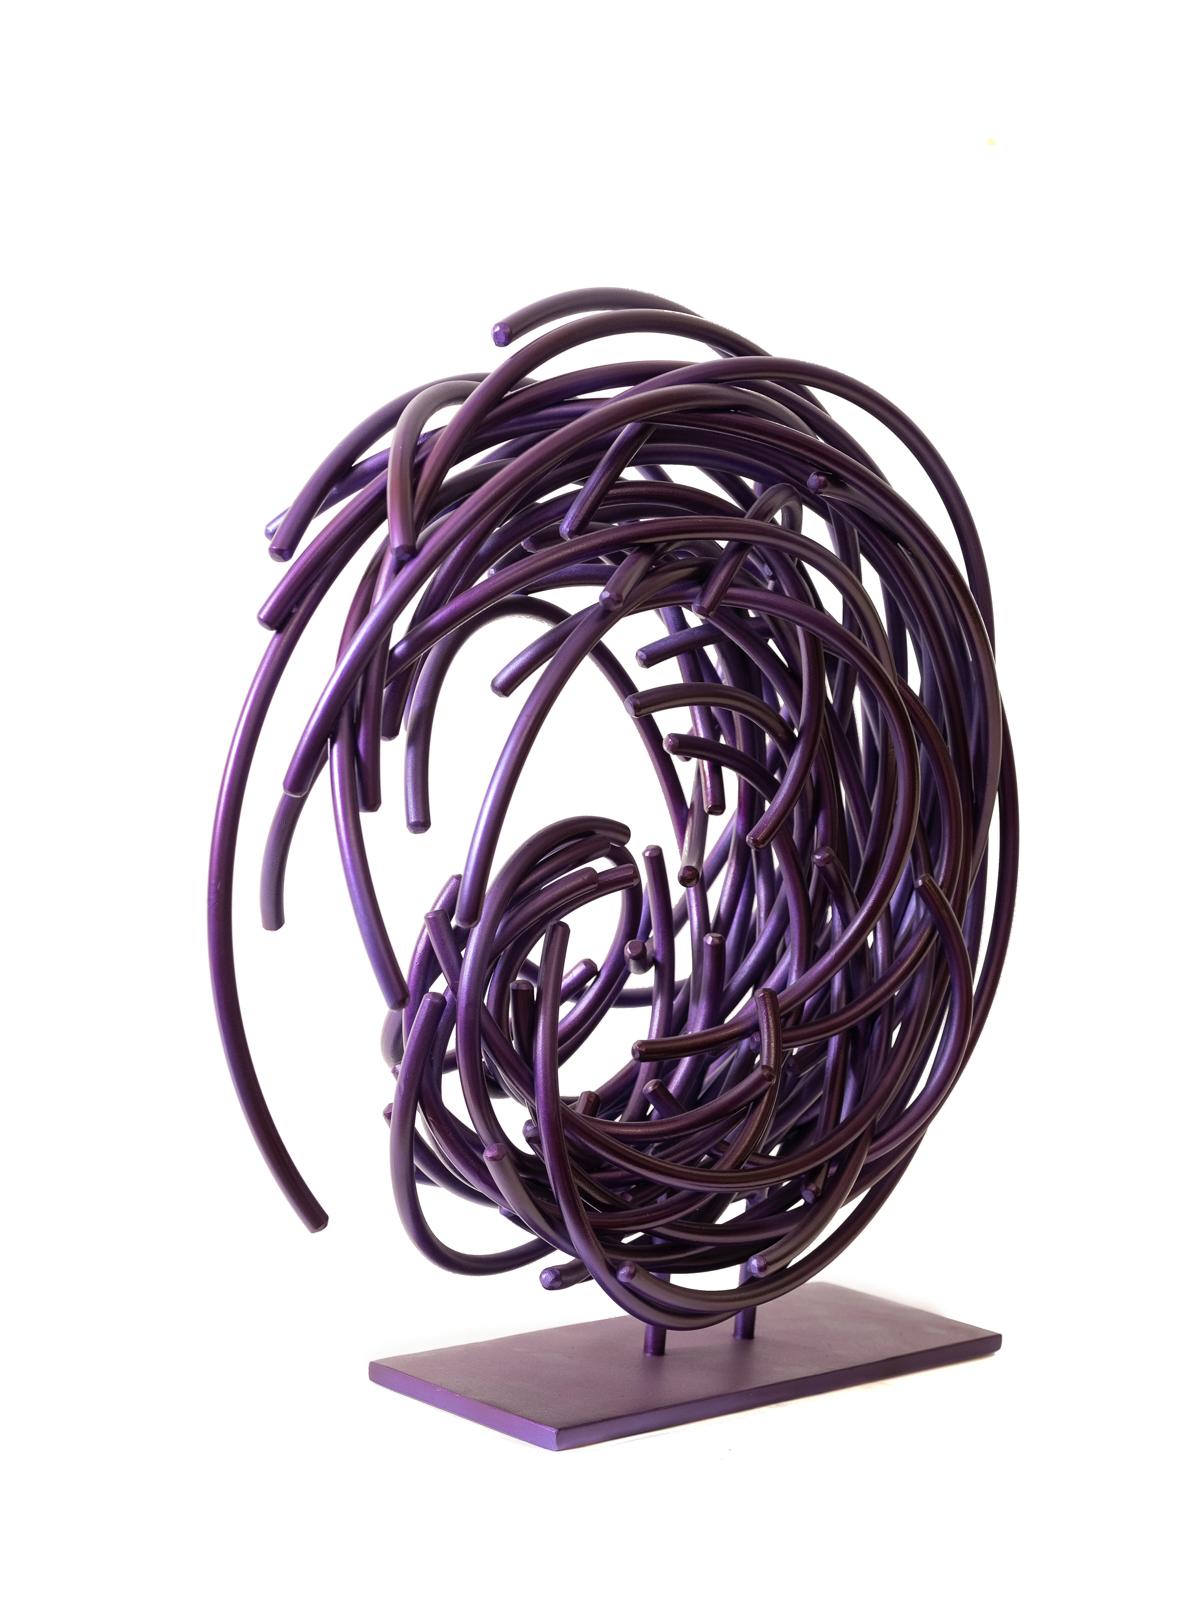 Maelstrom Series No 5 - layered, intersecting, forged aluminum sculpture - Purple Abstract Sculpture by Shayne Dark